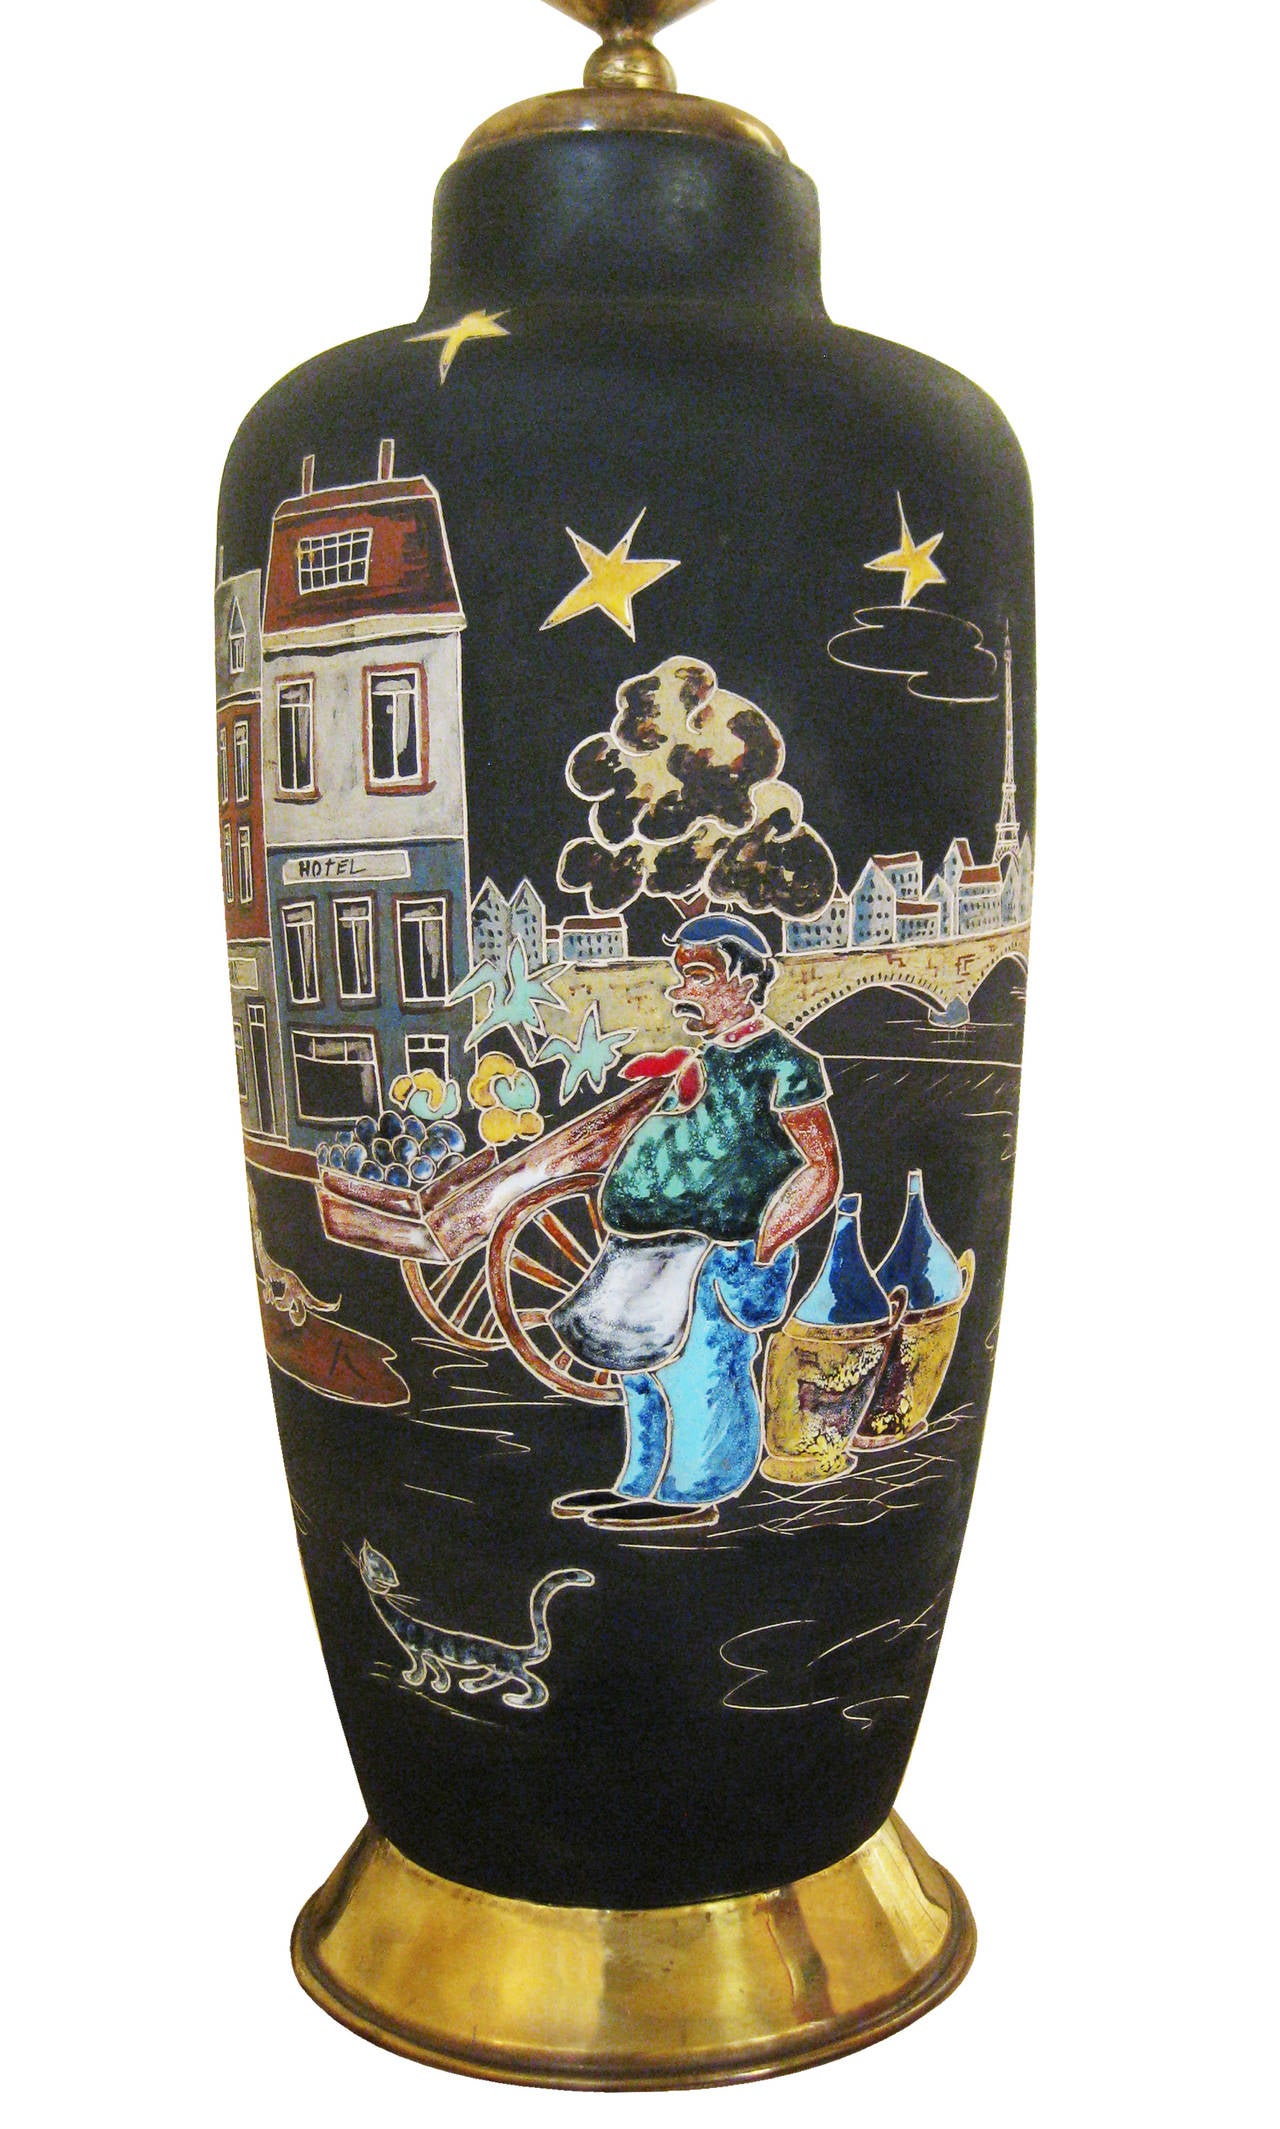 Complimentary pair of ceramic lamps with details glazed in bright colors. Trimmed in brass. Of German origin; signed Keto Keramik, Montmartre Edition, circa 1950.

The scenes on both lamps depict Parisian bohemian life in Montmartre. The shades